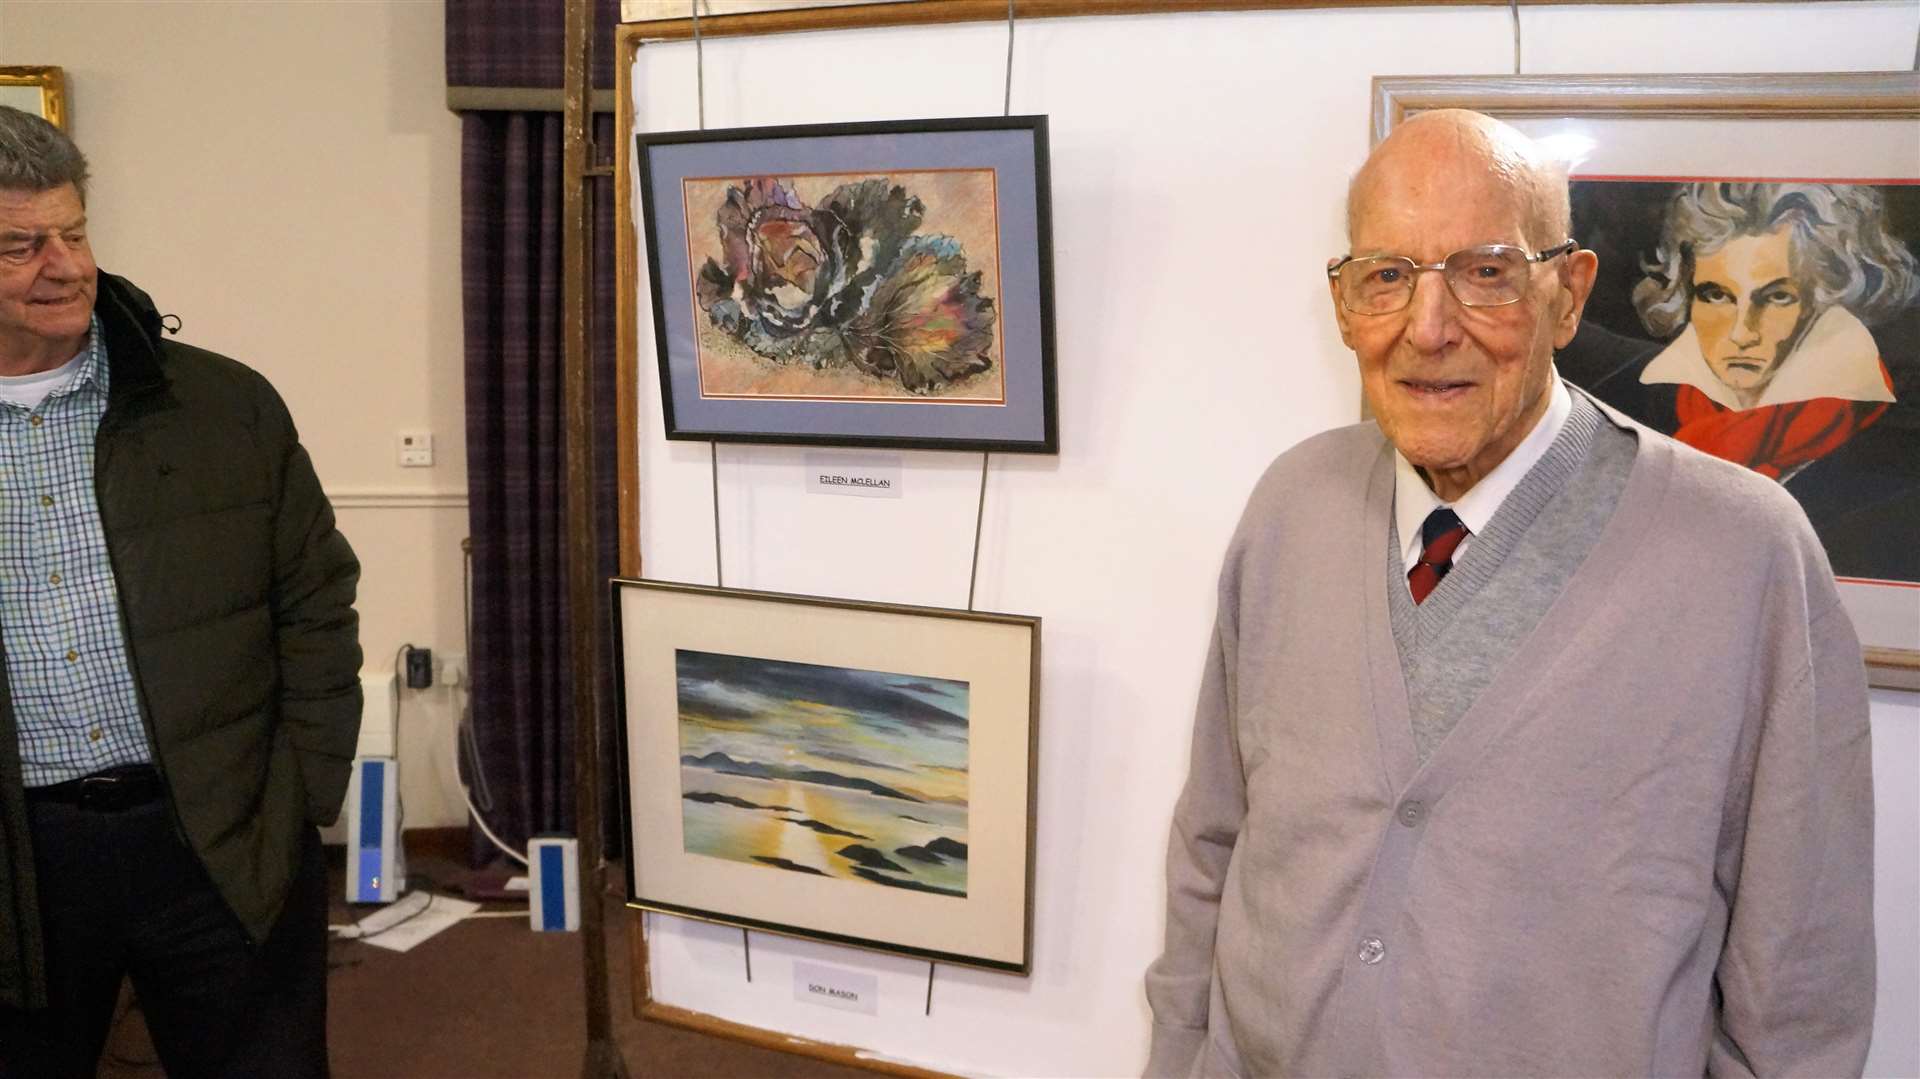 In 2019 Don exhibited a painting he did during the war at an exhibition in Pentland View care home where he now resides. The painting - at lower left - shows the sun rising over west coast islands. He had to beach his plane and was stranded in the area for several days so spent some time capturing the beautiful scenery. Picture: DGS